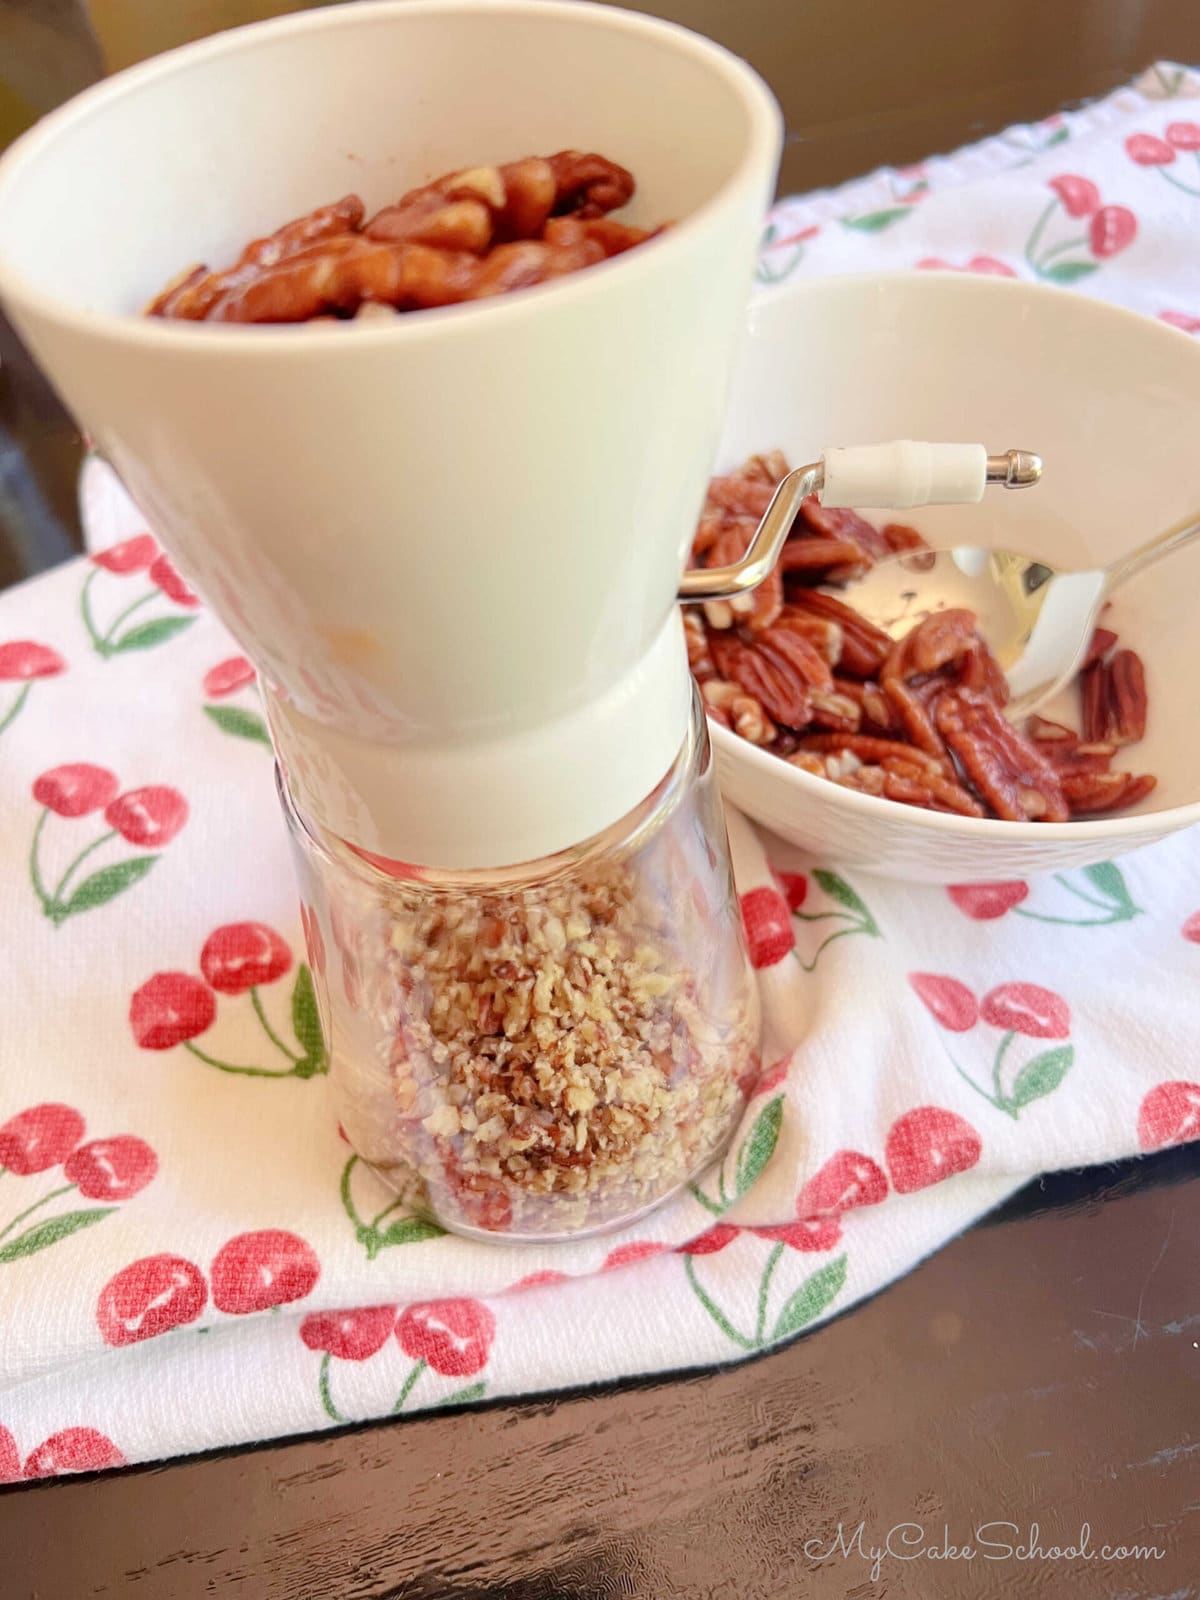 Finely chopped, roasted pecans.